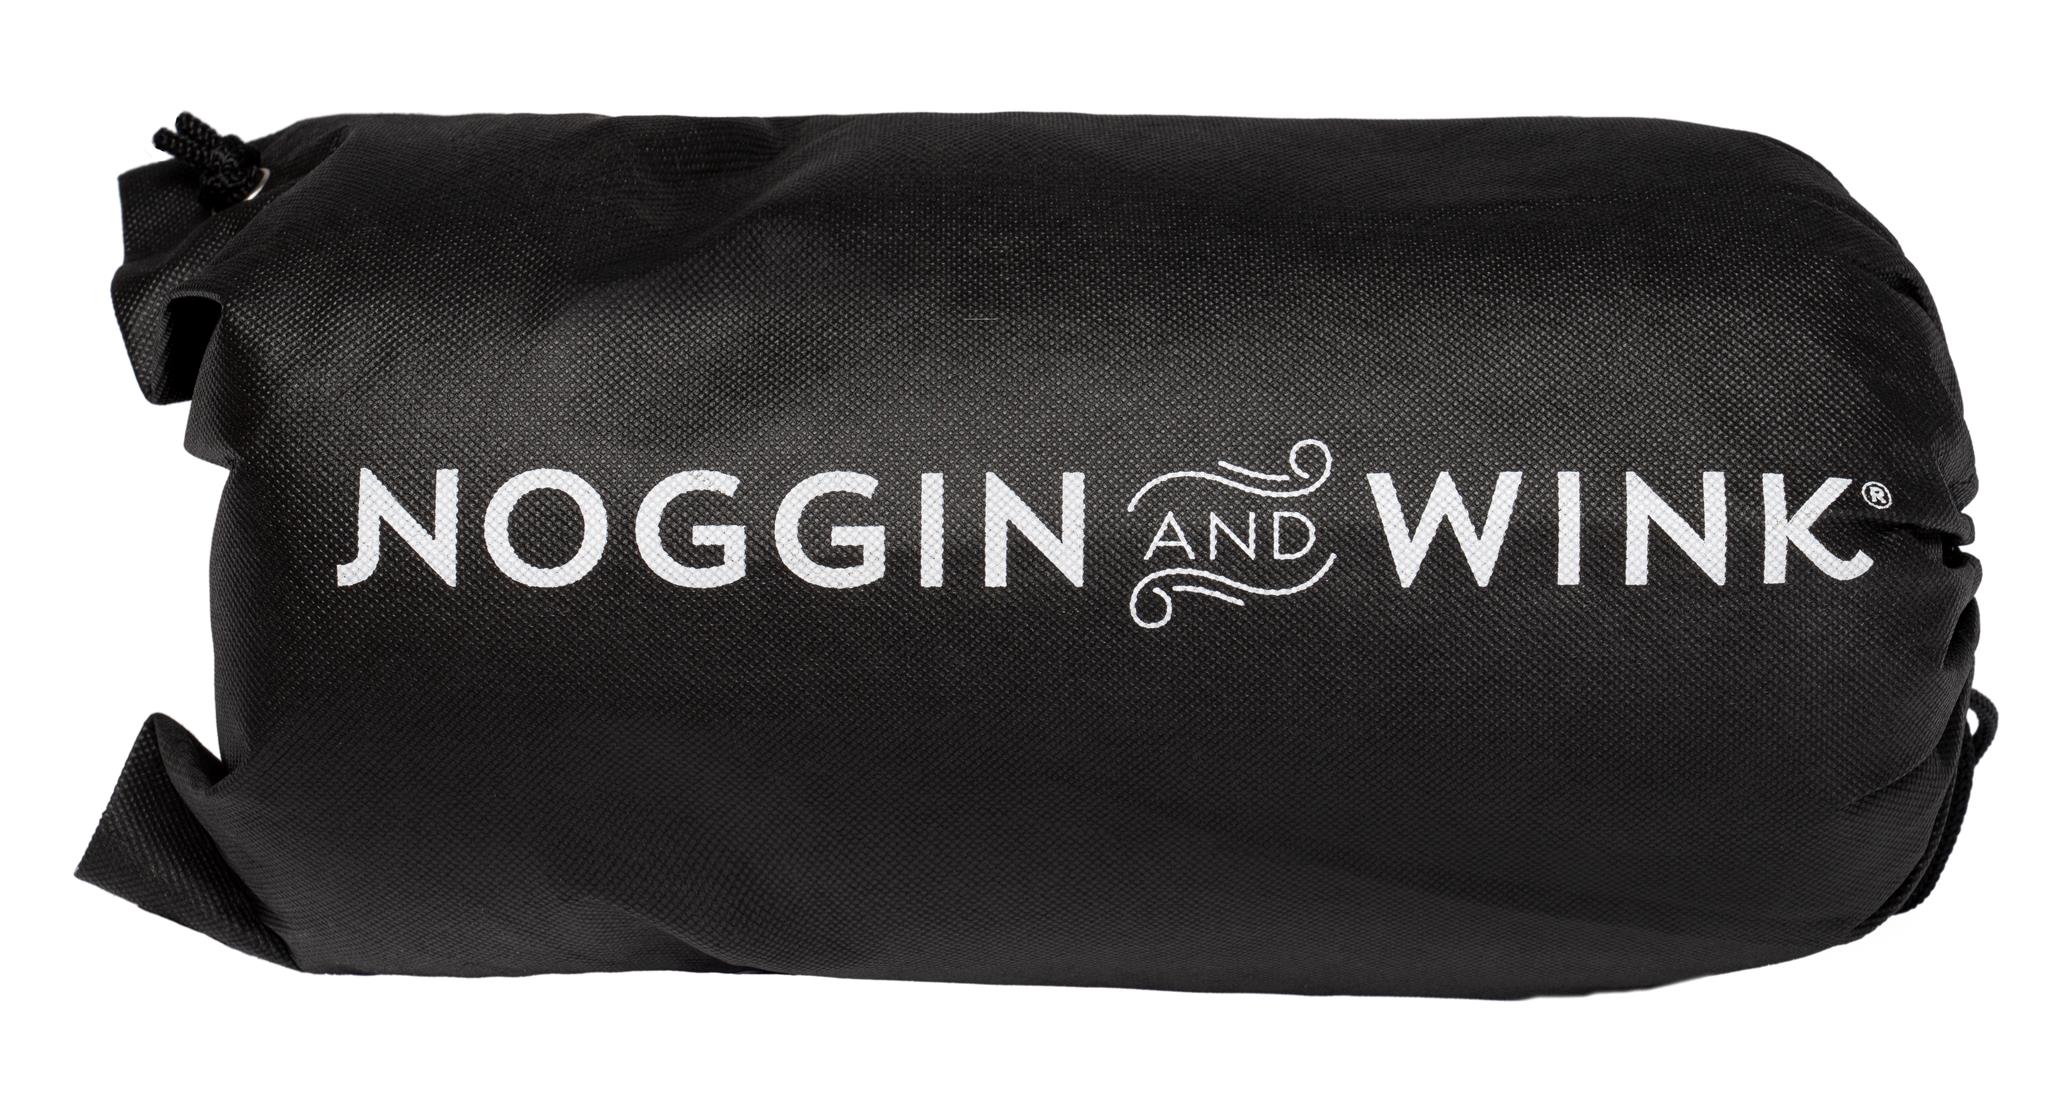 Noggin & Wink Plush On the Go Ventilated Memory Foam Travel Pillow for All Sleep Positions - Premium Hypoallergenic Compact Pillow with Drawstring Carry Bag